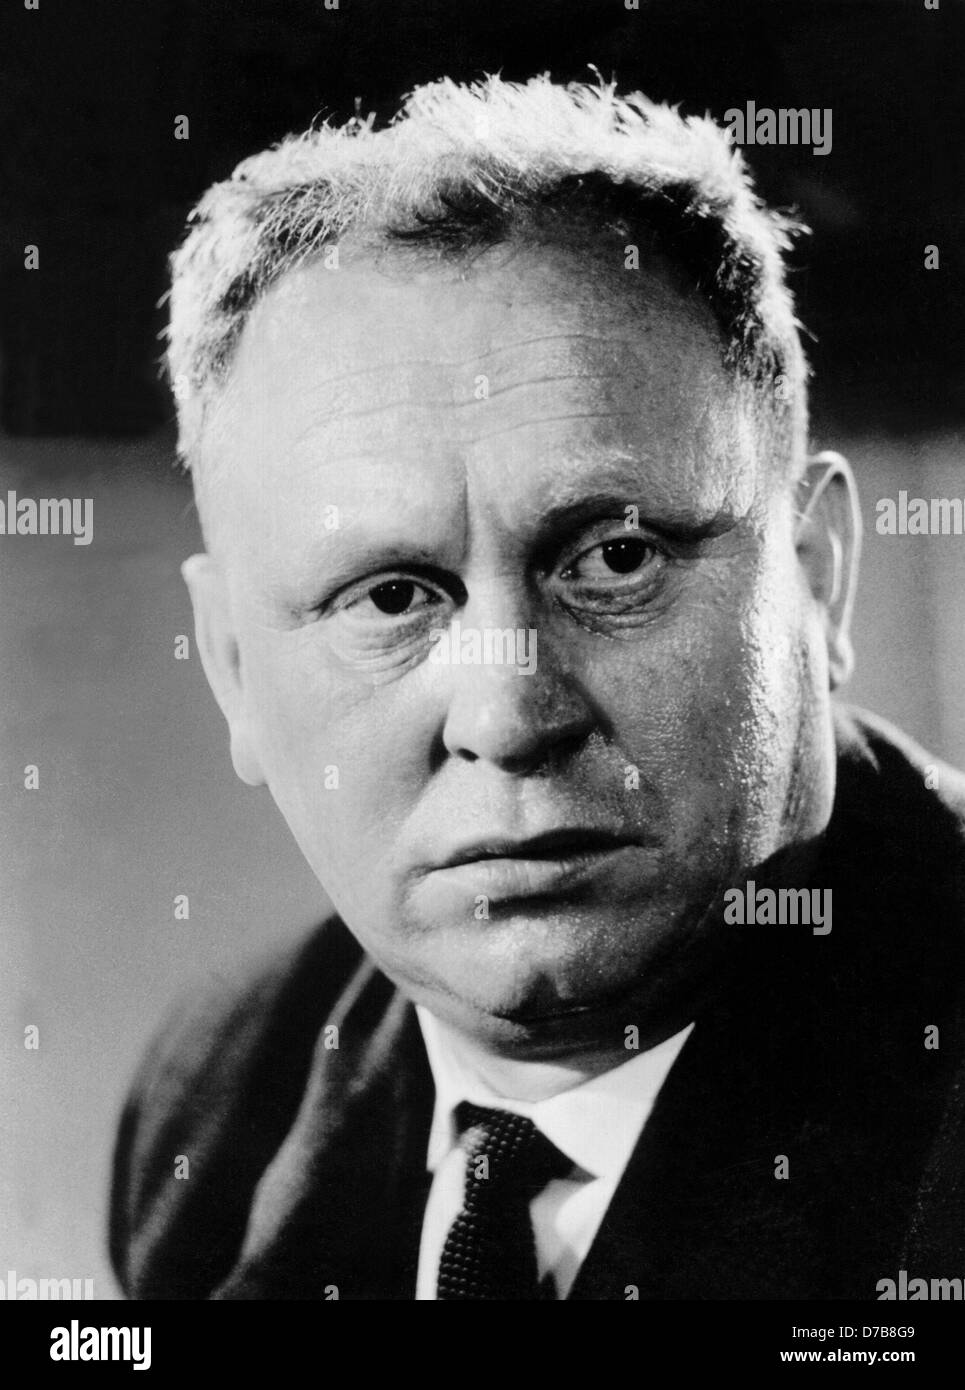 Internationally known actor Gert Fröbe in the year 1959. He wars born on the 25th of February in 1913 and died on the 5th of September in 1988 in Munich. Stock Photo